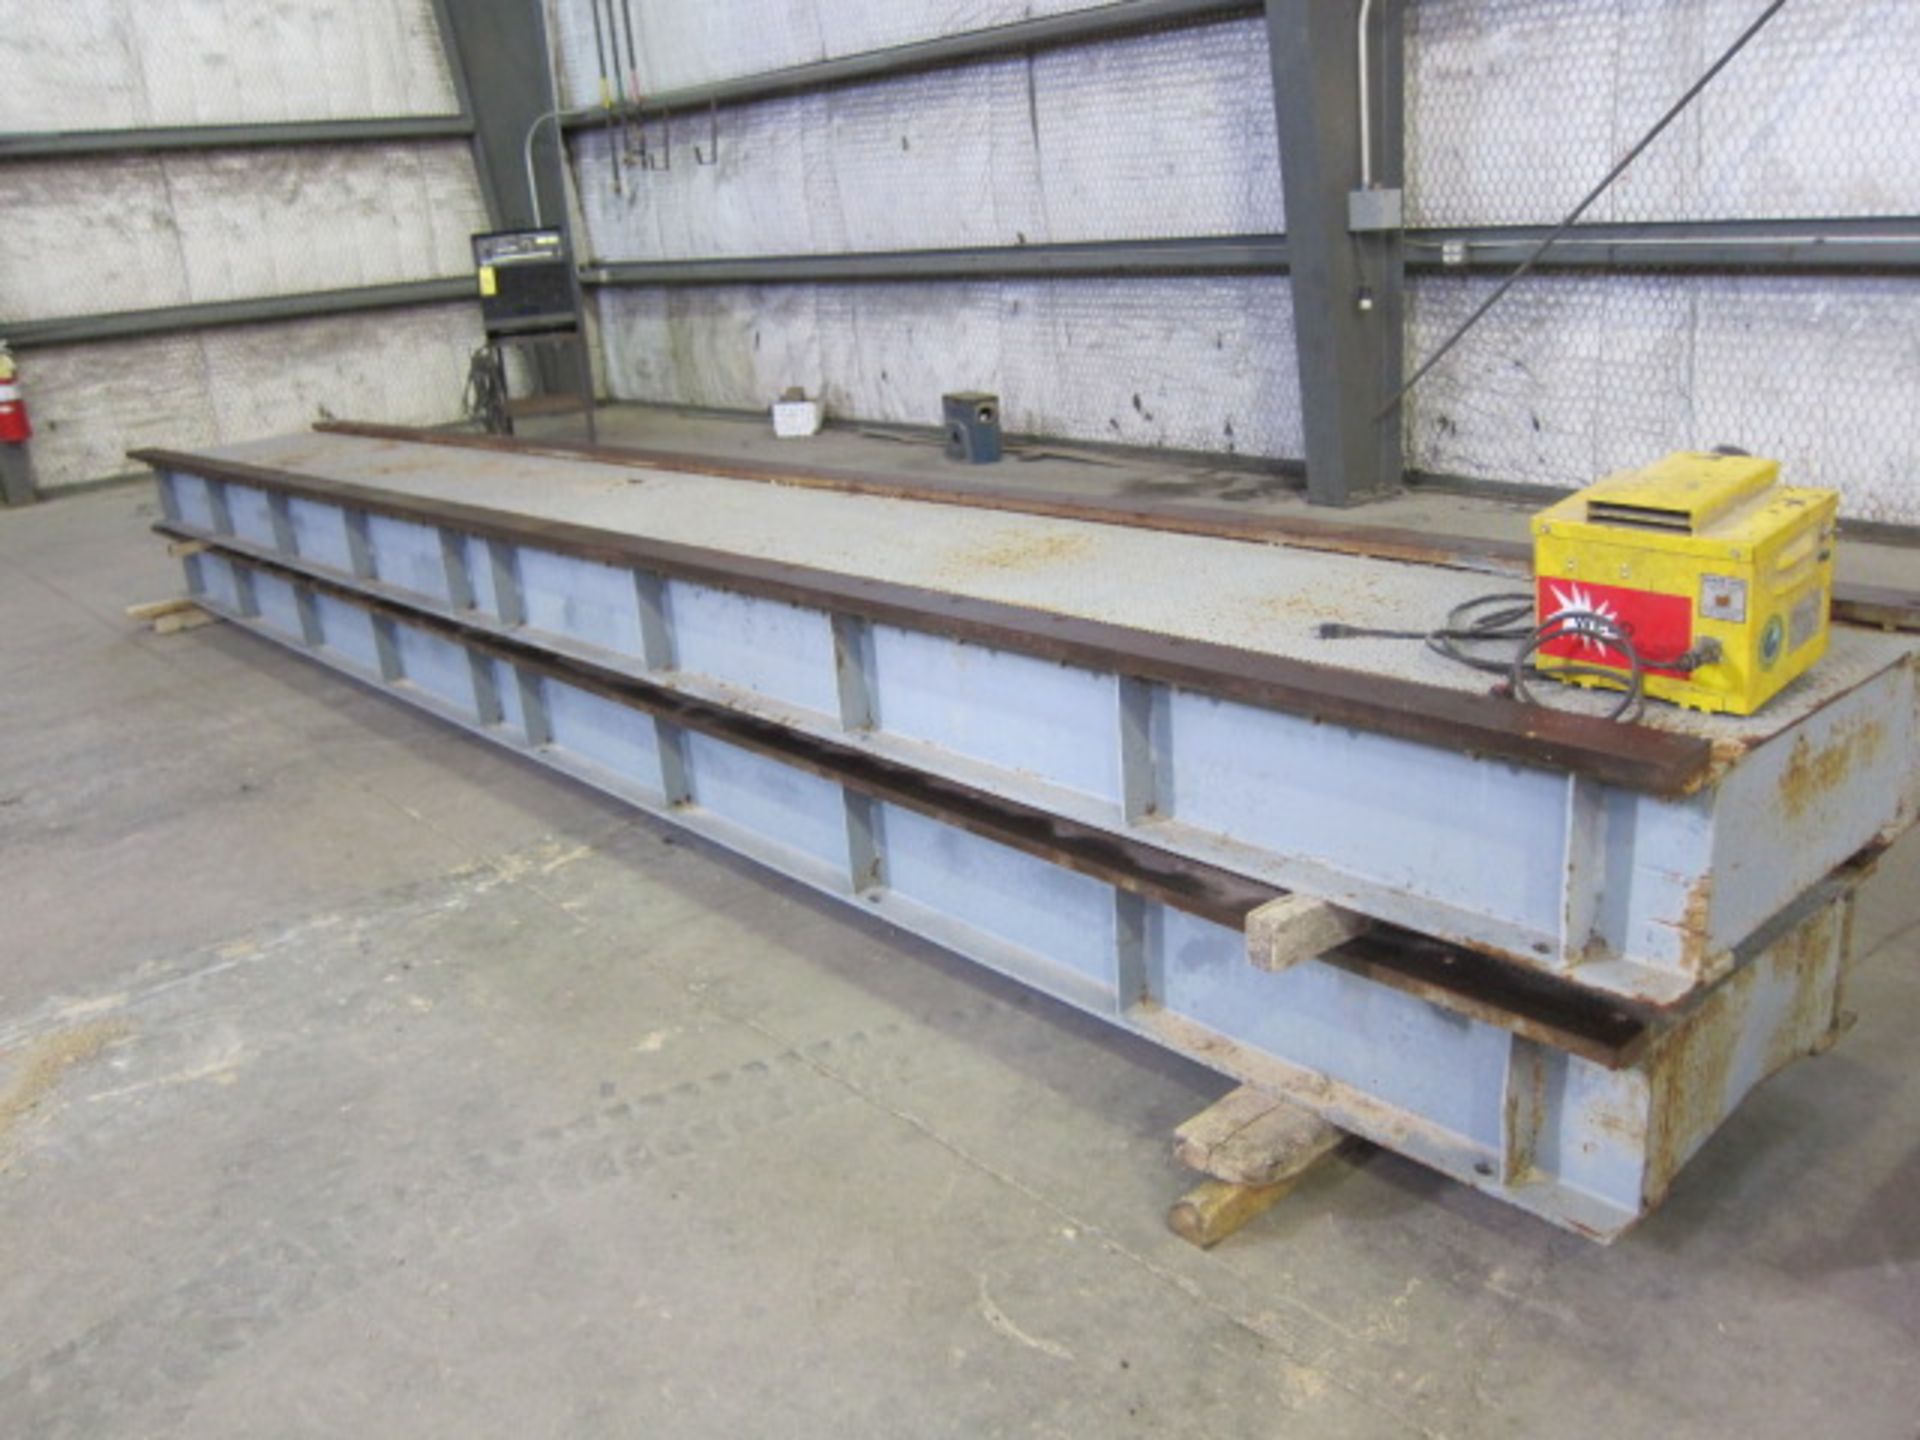 WELDING MANIPULATOR, RANSOME MDL. 1212, 12' x 12' travels, track base w/14' travel, spare track base - Image 7 of 10